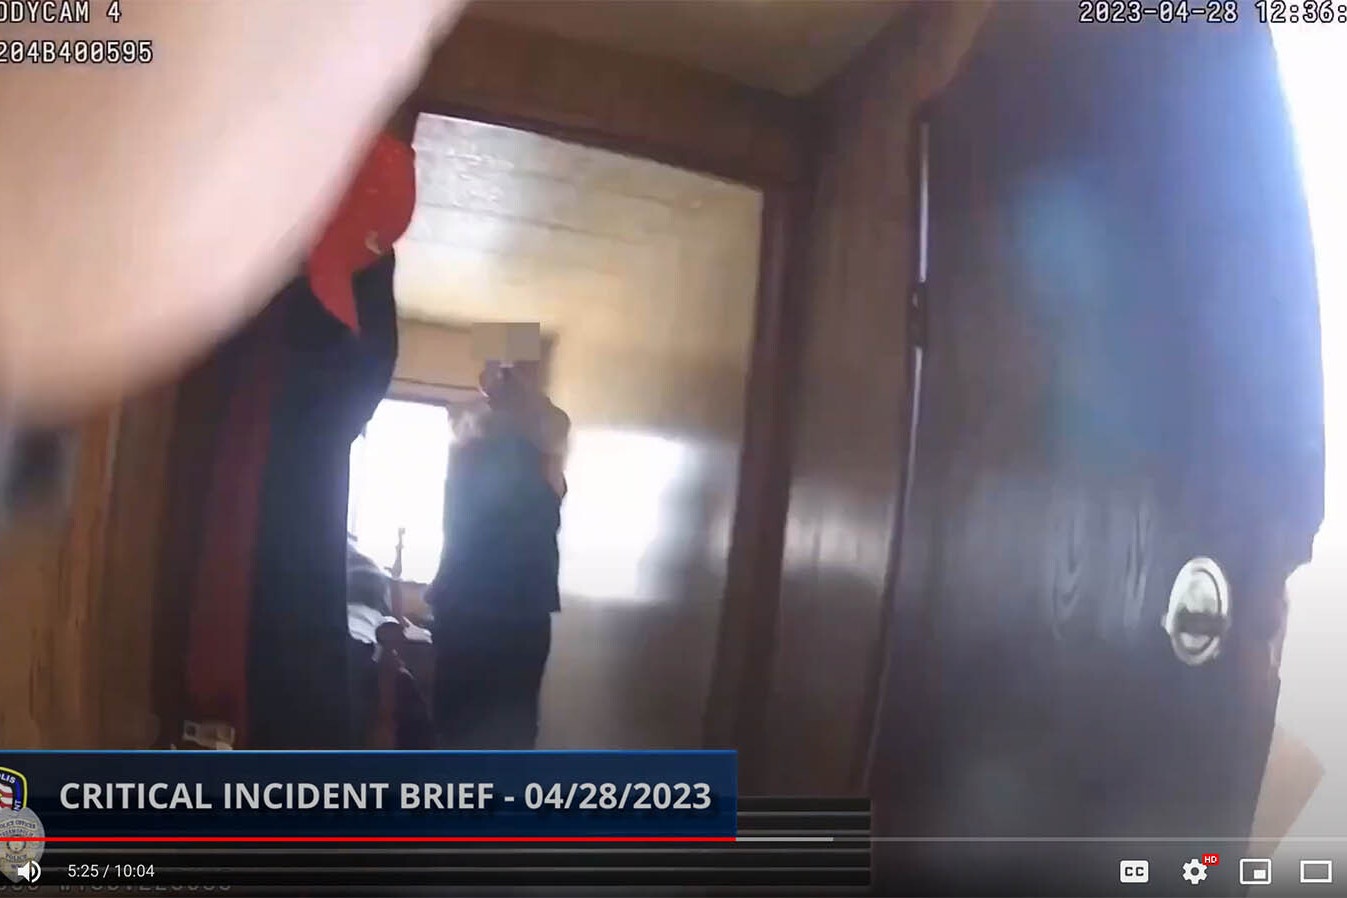 In this image from Thermopolis Police Sgt. Mike Mascorro's body cam on April 28, 2023, shows Mascorro being confronted by and armed Buck Laramore after breaking into Laramore's home intending to arrest him.